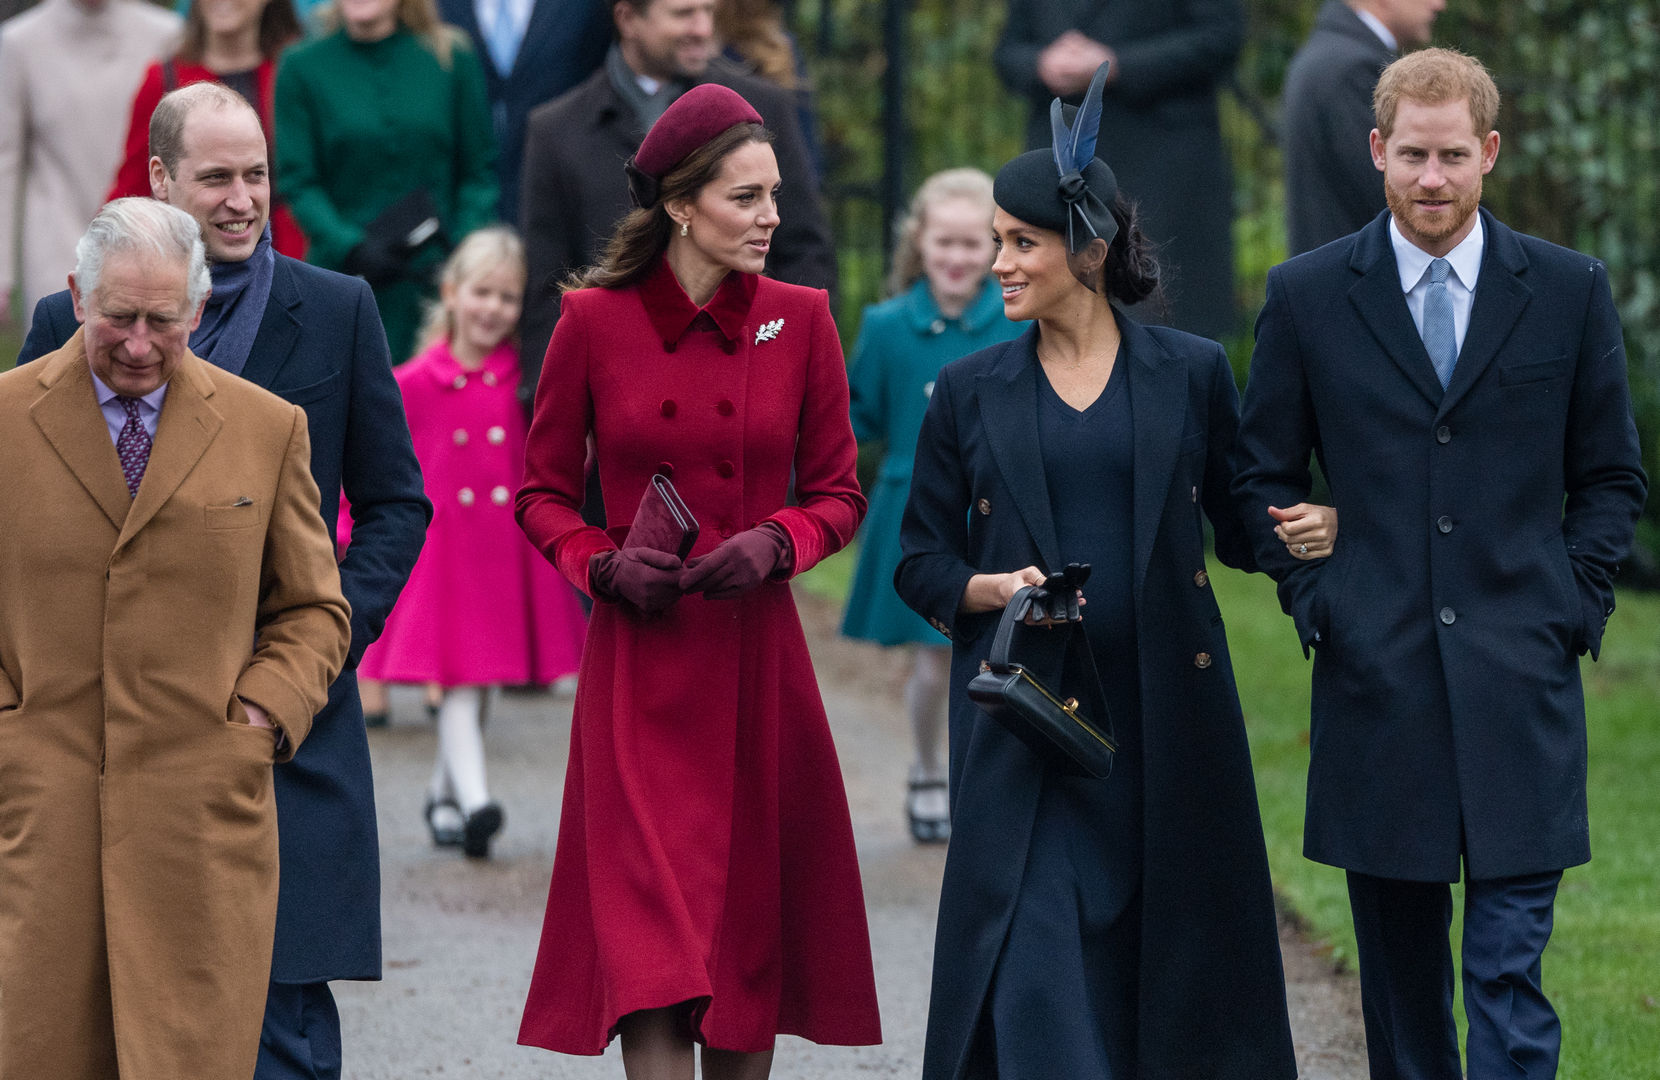 Kate Middleton Repeats Her Outfit at Commonwealth Day Service, Does Not ...